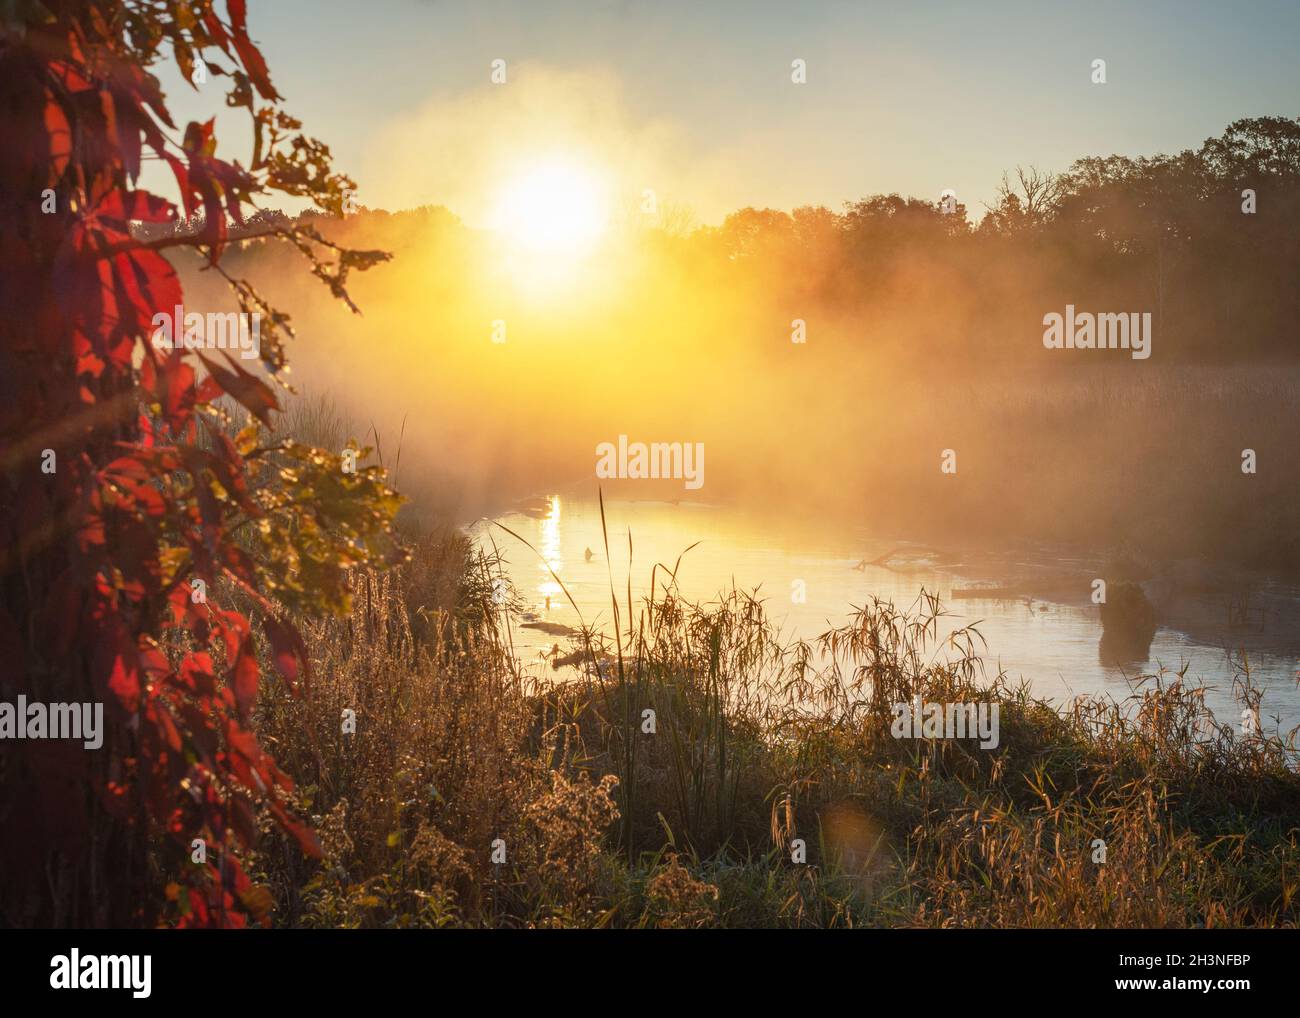 The sun peaks over the distant tree line as steam and fog collect in the marshy river basin in Waukesha County, Wisconsin on an autumn morning. Stock Photo